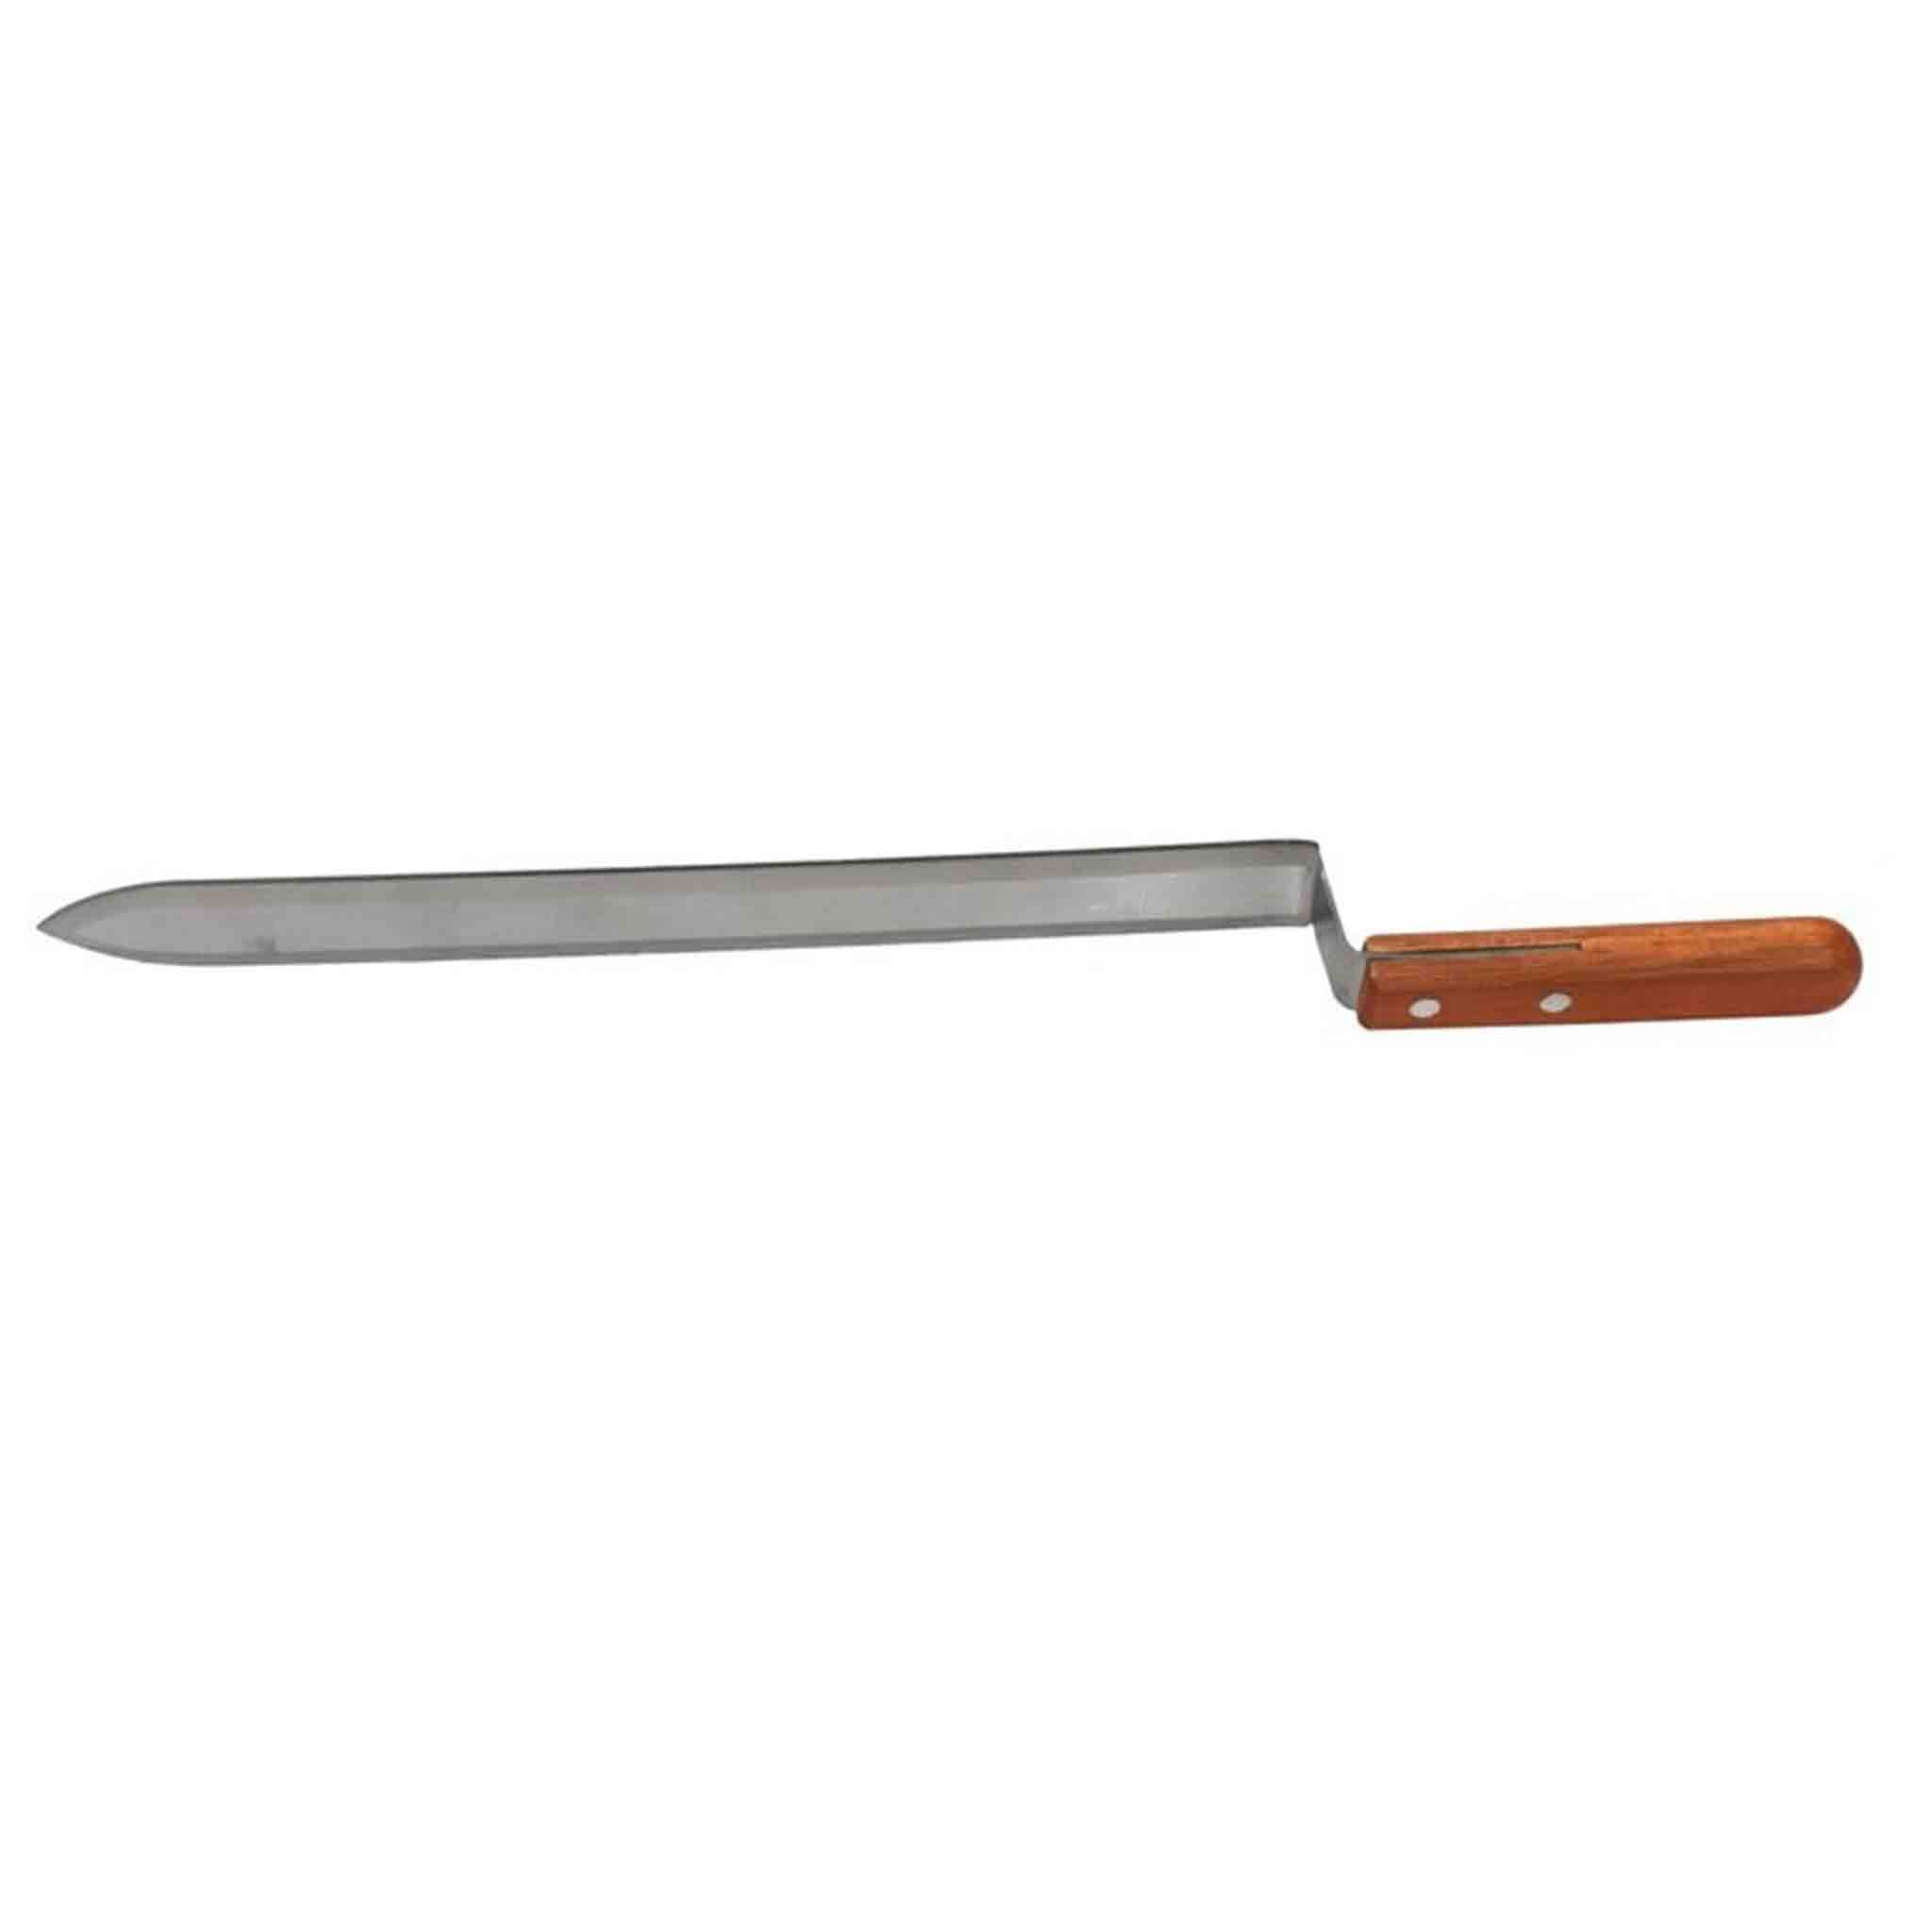 Beekeeping Scraper Knife with smooth edged blade. - Tools collection by Buzzbee Beekeeping Supplies